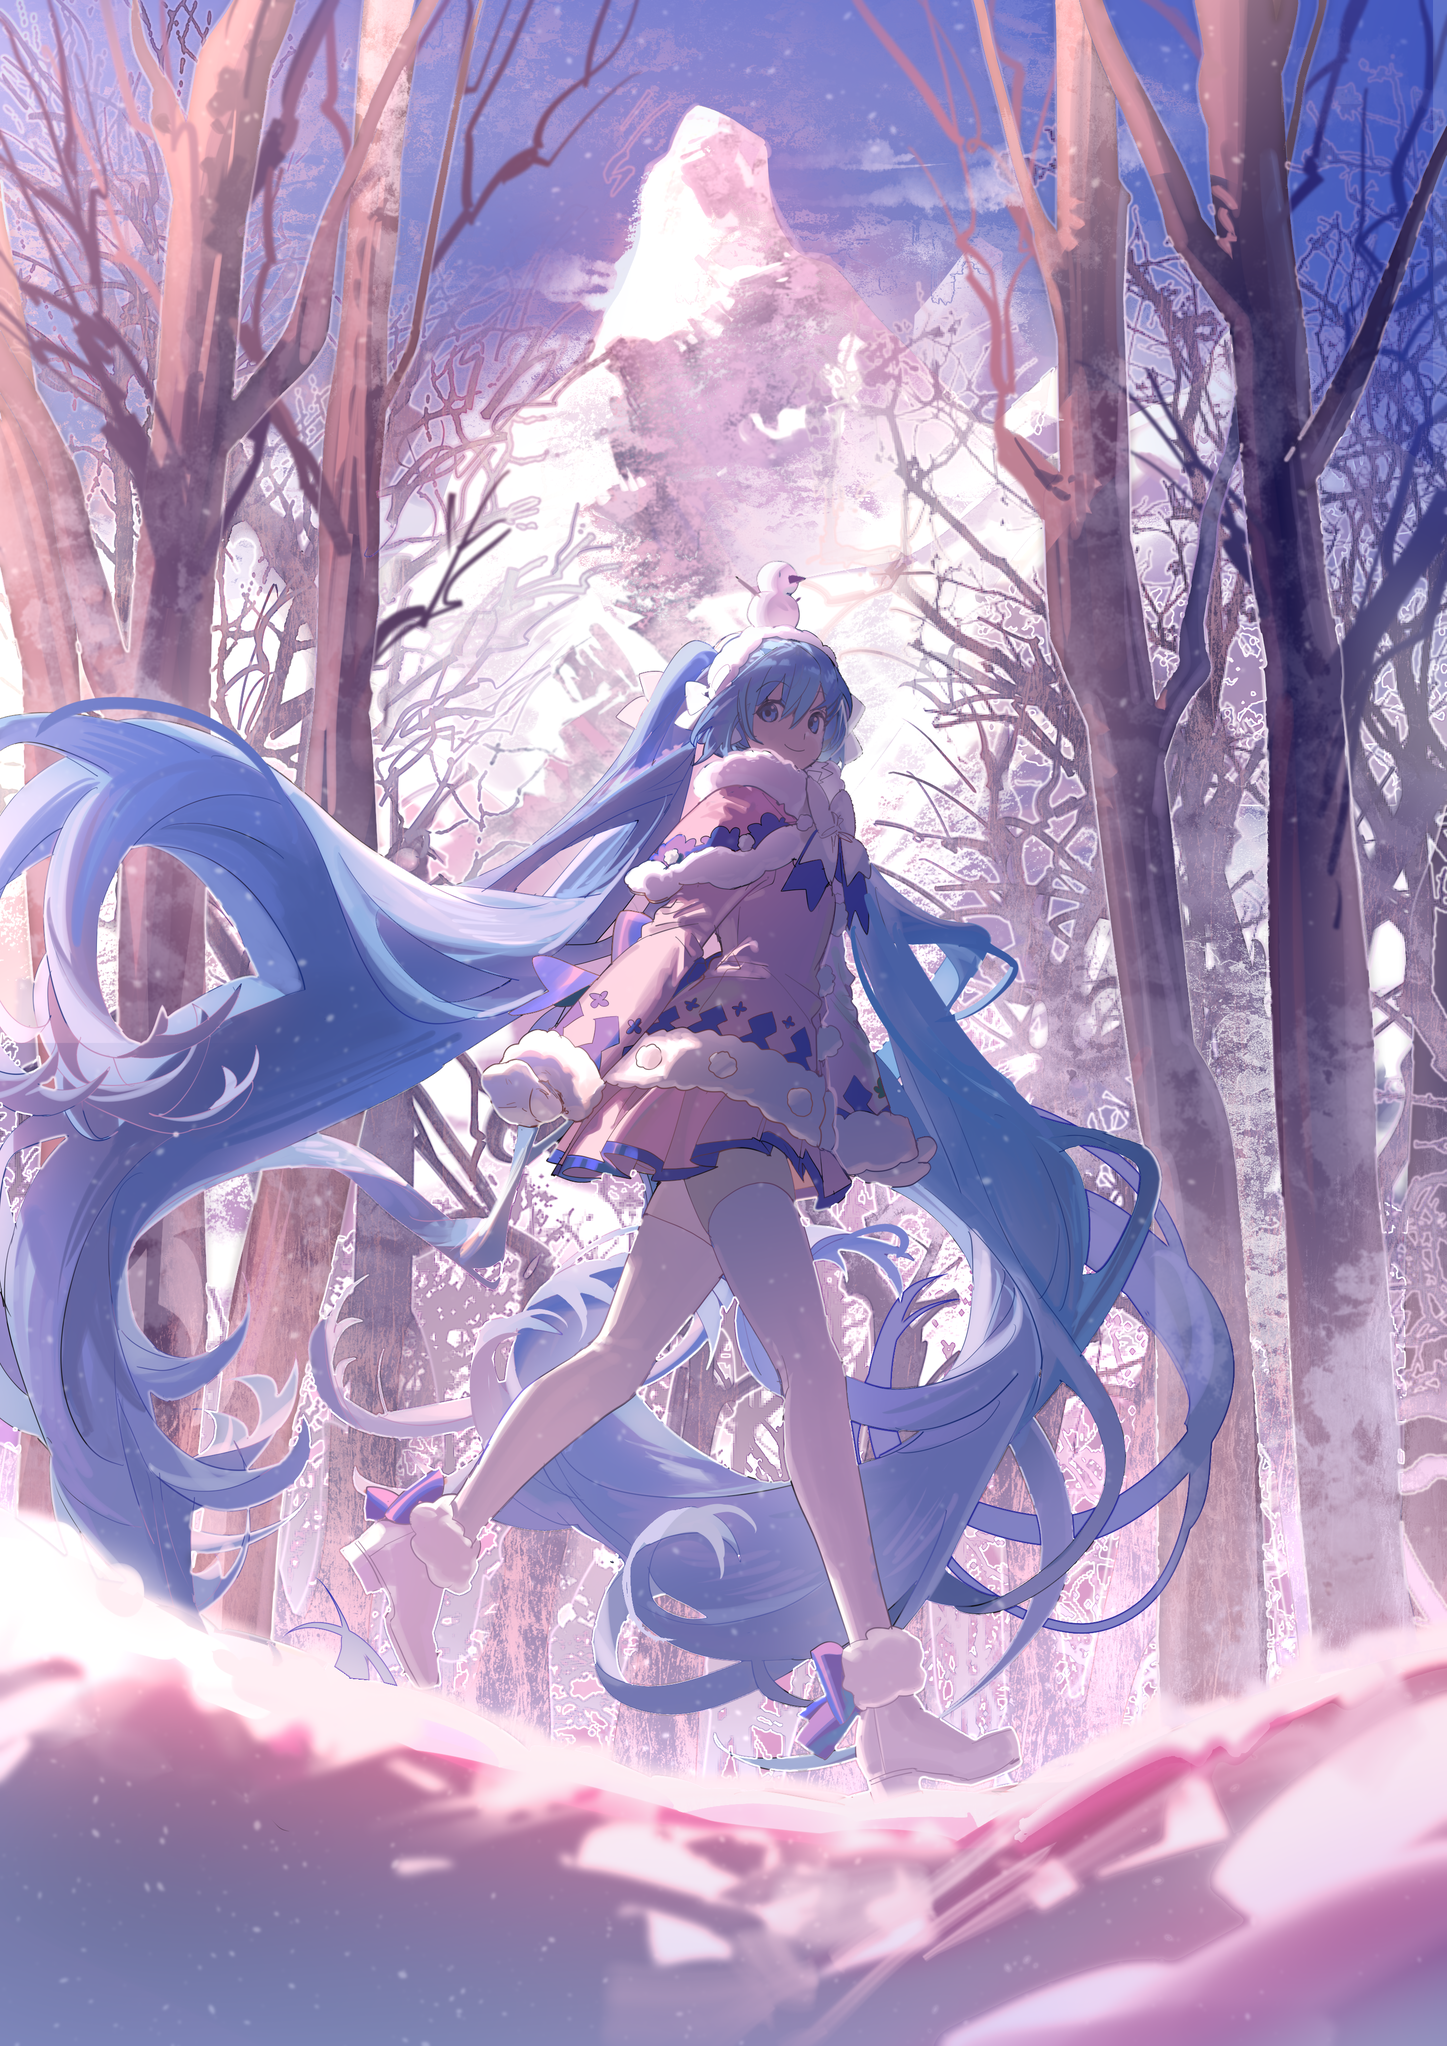 Anime 1447x2046 anime Pixiv anime girls Vocaloid Hatsune Miku trees long hair twintails blue hair blue eyes walking snow sky smiling gloves stockings portrait display looking at viewer winter bow tie Shuno (artist)